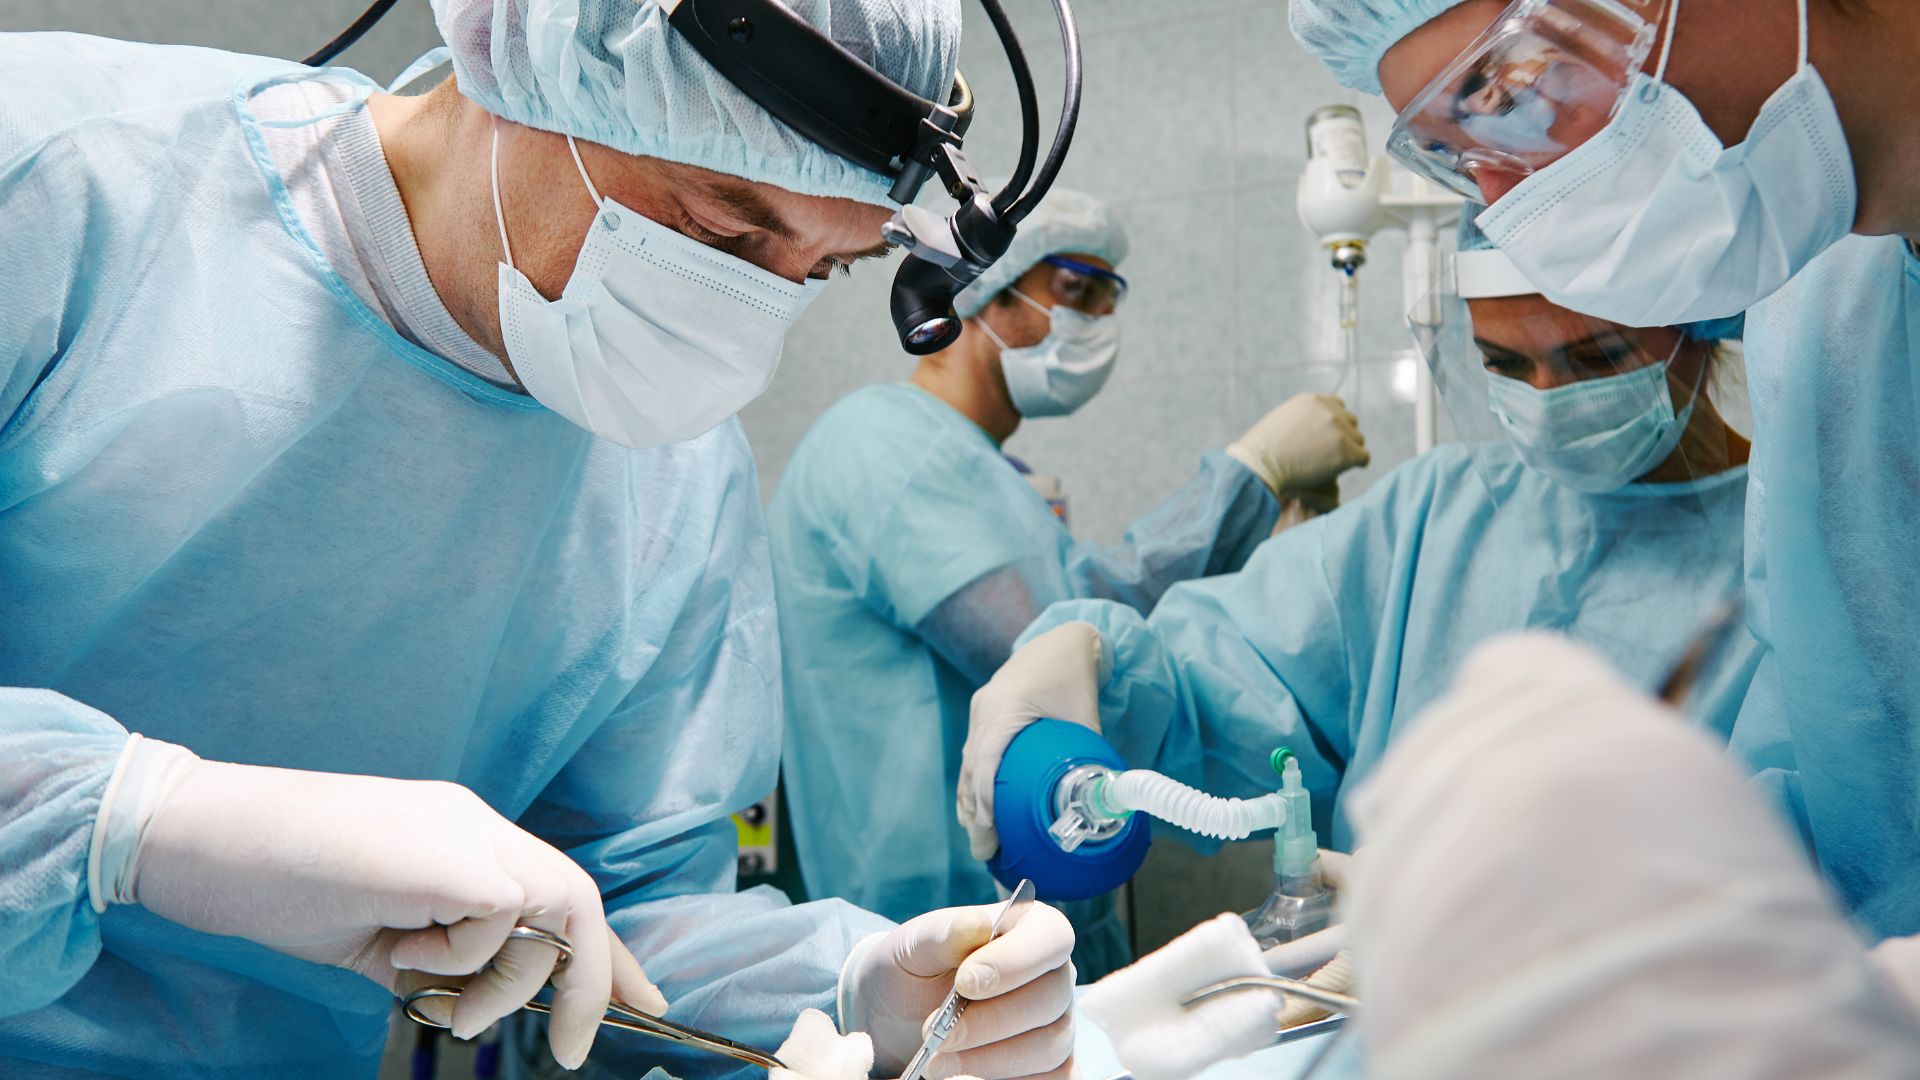 A group of surgeons working in an operating room for Emerging Treatments for Hidradenitis Suppurativa, HS Treatments